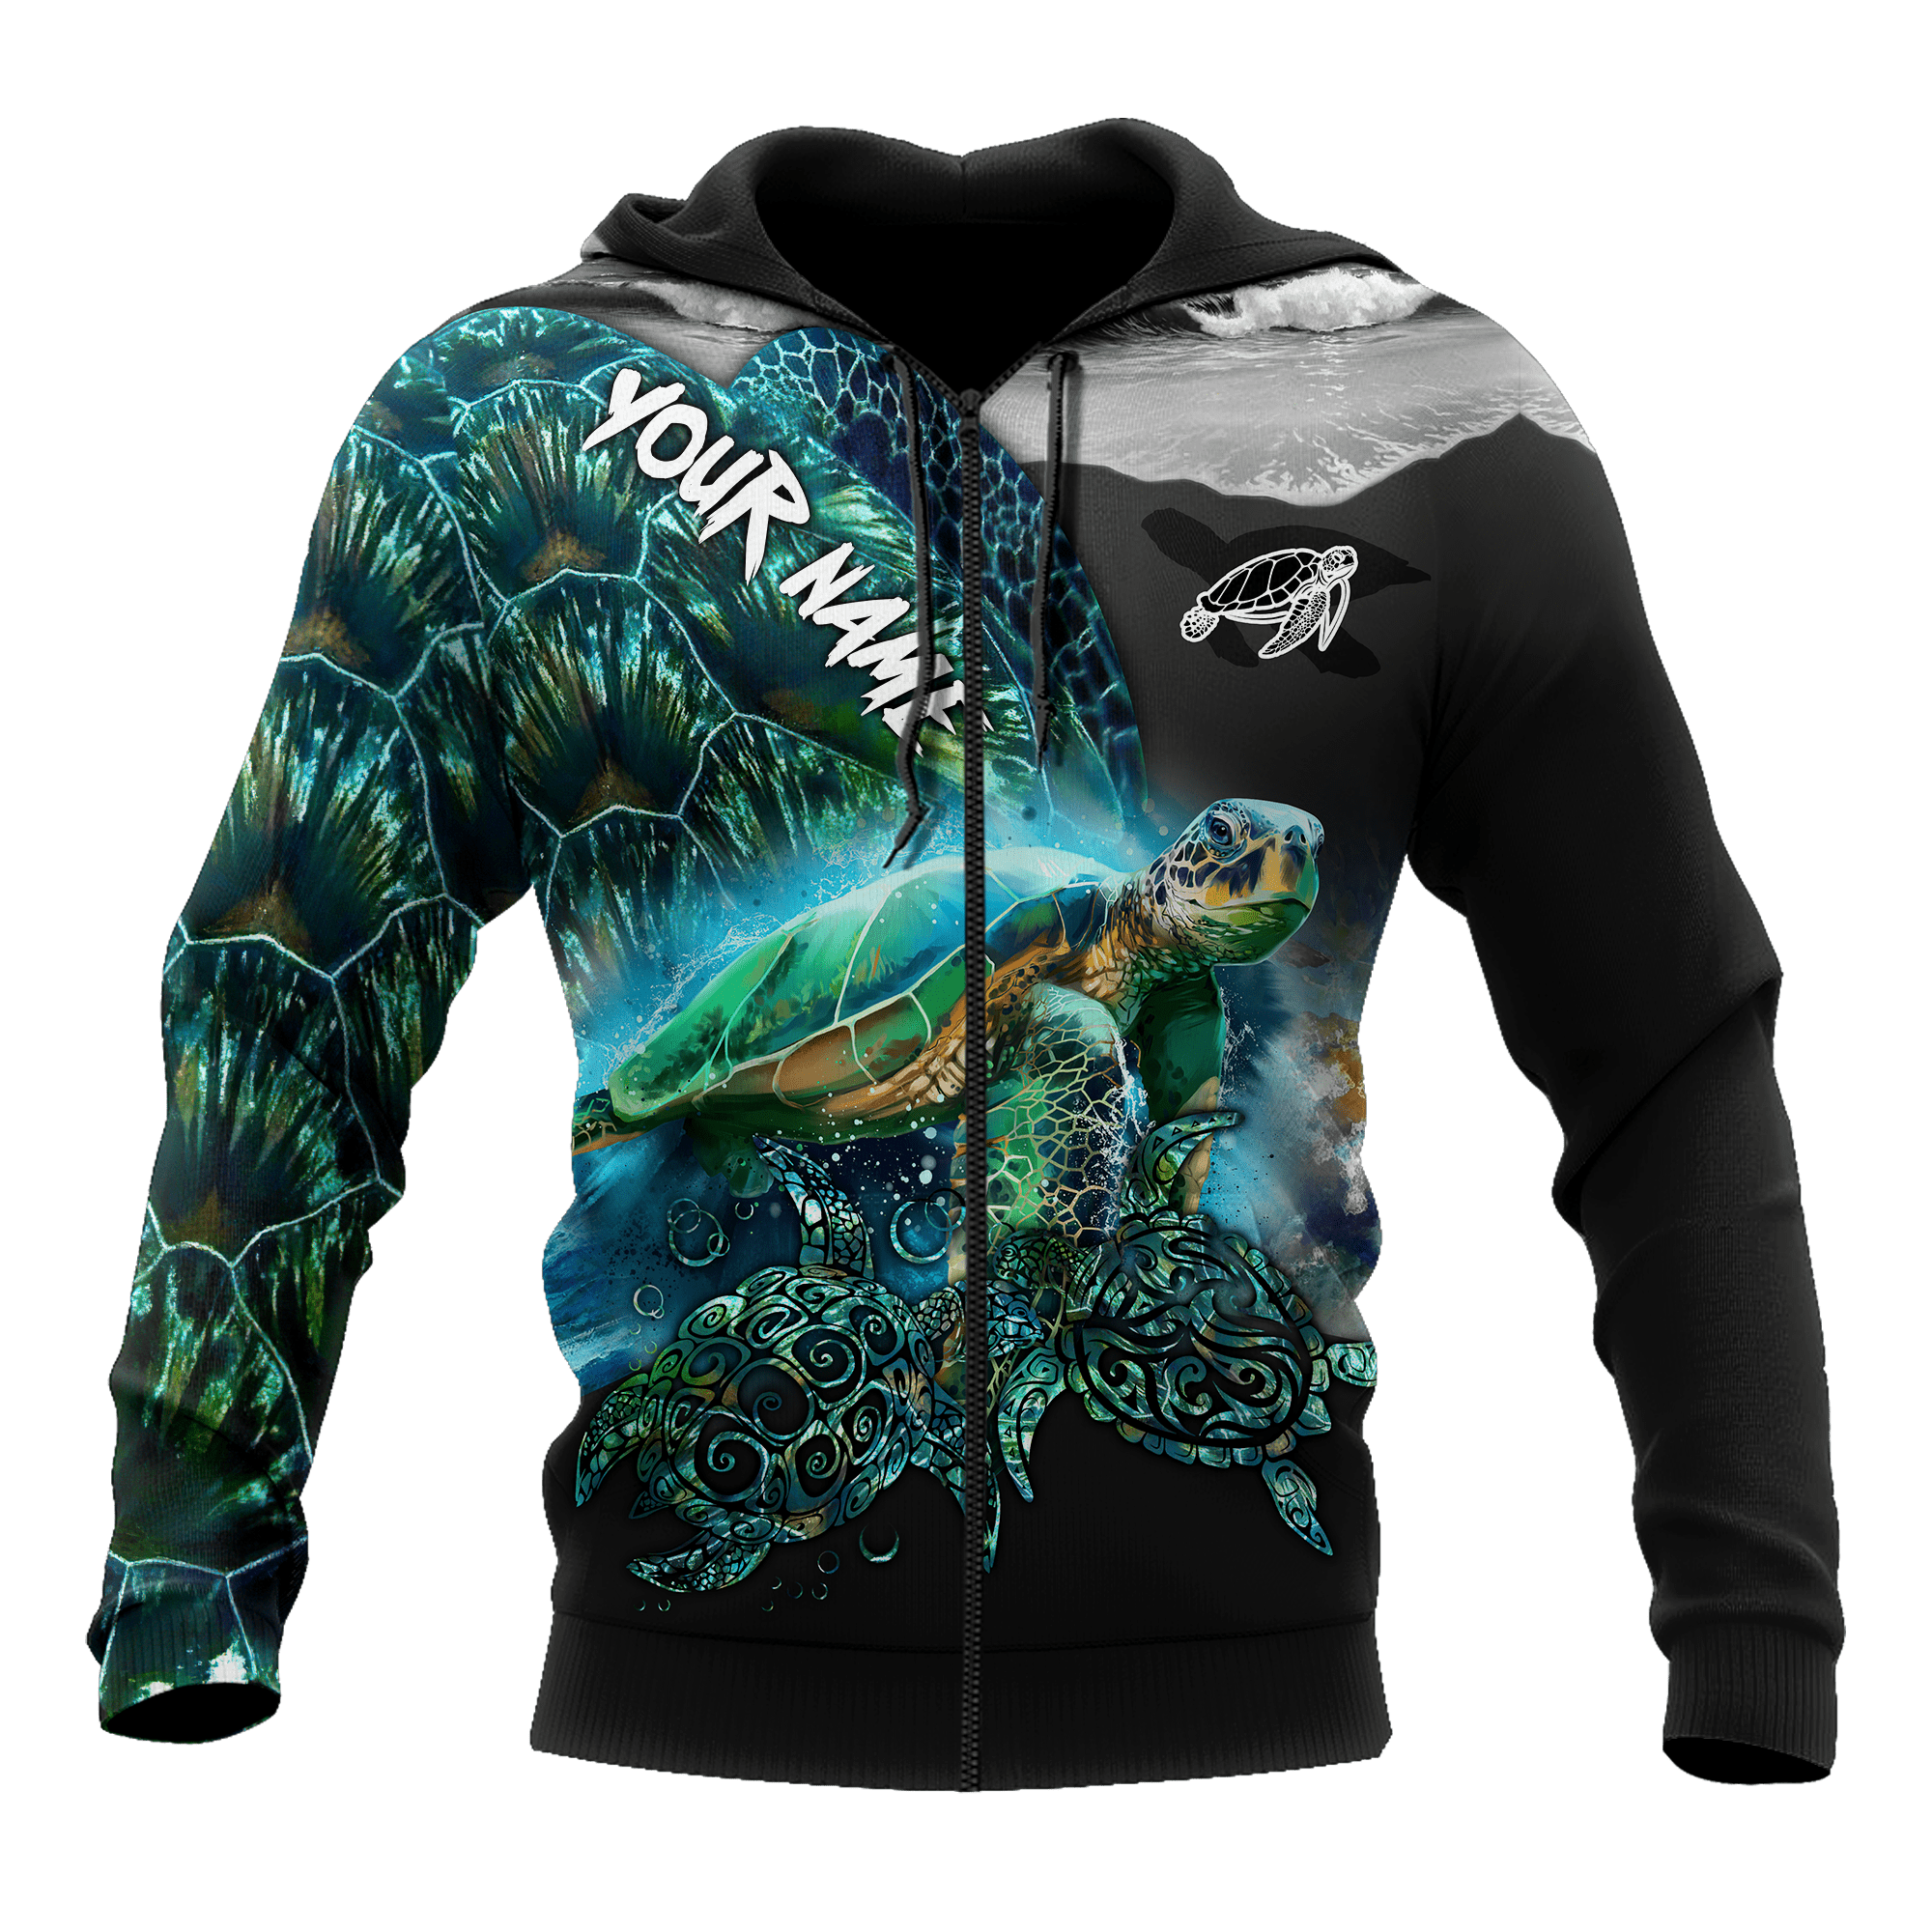 Turtle 3D Hoodie shirt for men and women customize name AM102025